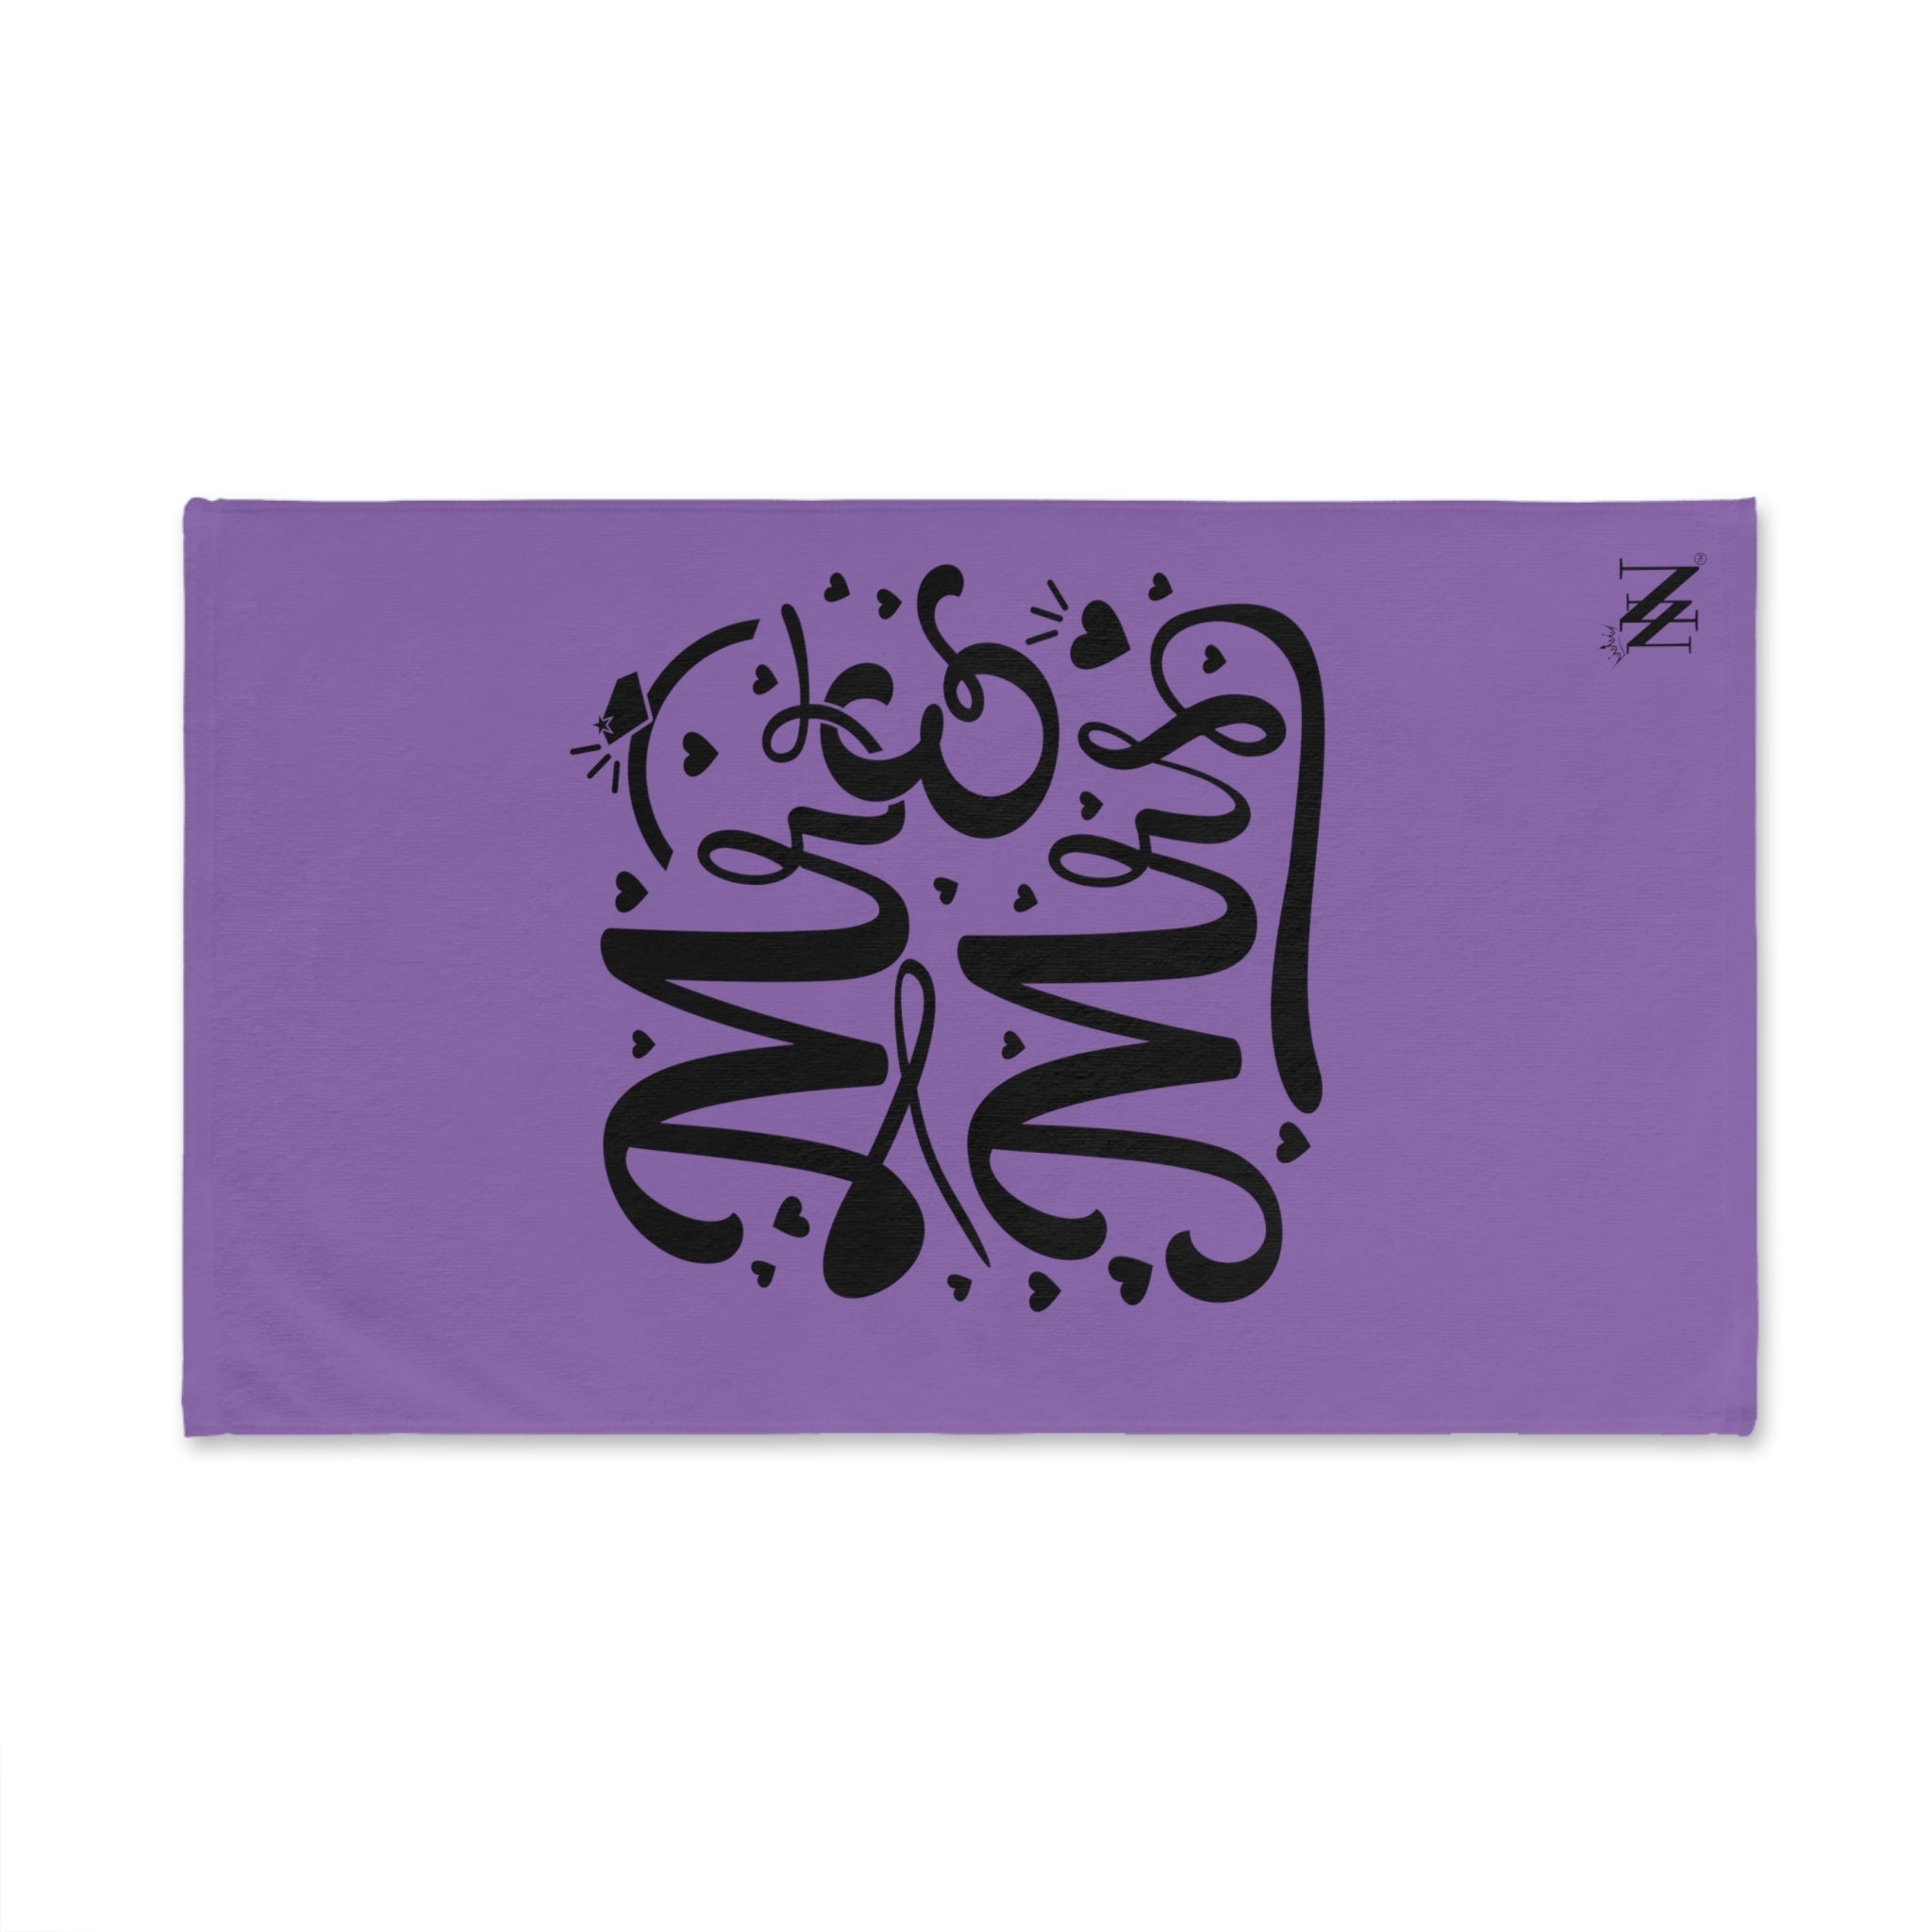 Mr Mrs Bride Lavendar | Funny Gifts for Men - Gifts for Him - Birthday Gifts for Men, Him, Husband, Boyfriend, New Couple Gifts, Fathers & Valentines Day Gifts, Hand Towels NECTAR NAPKINS